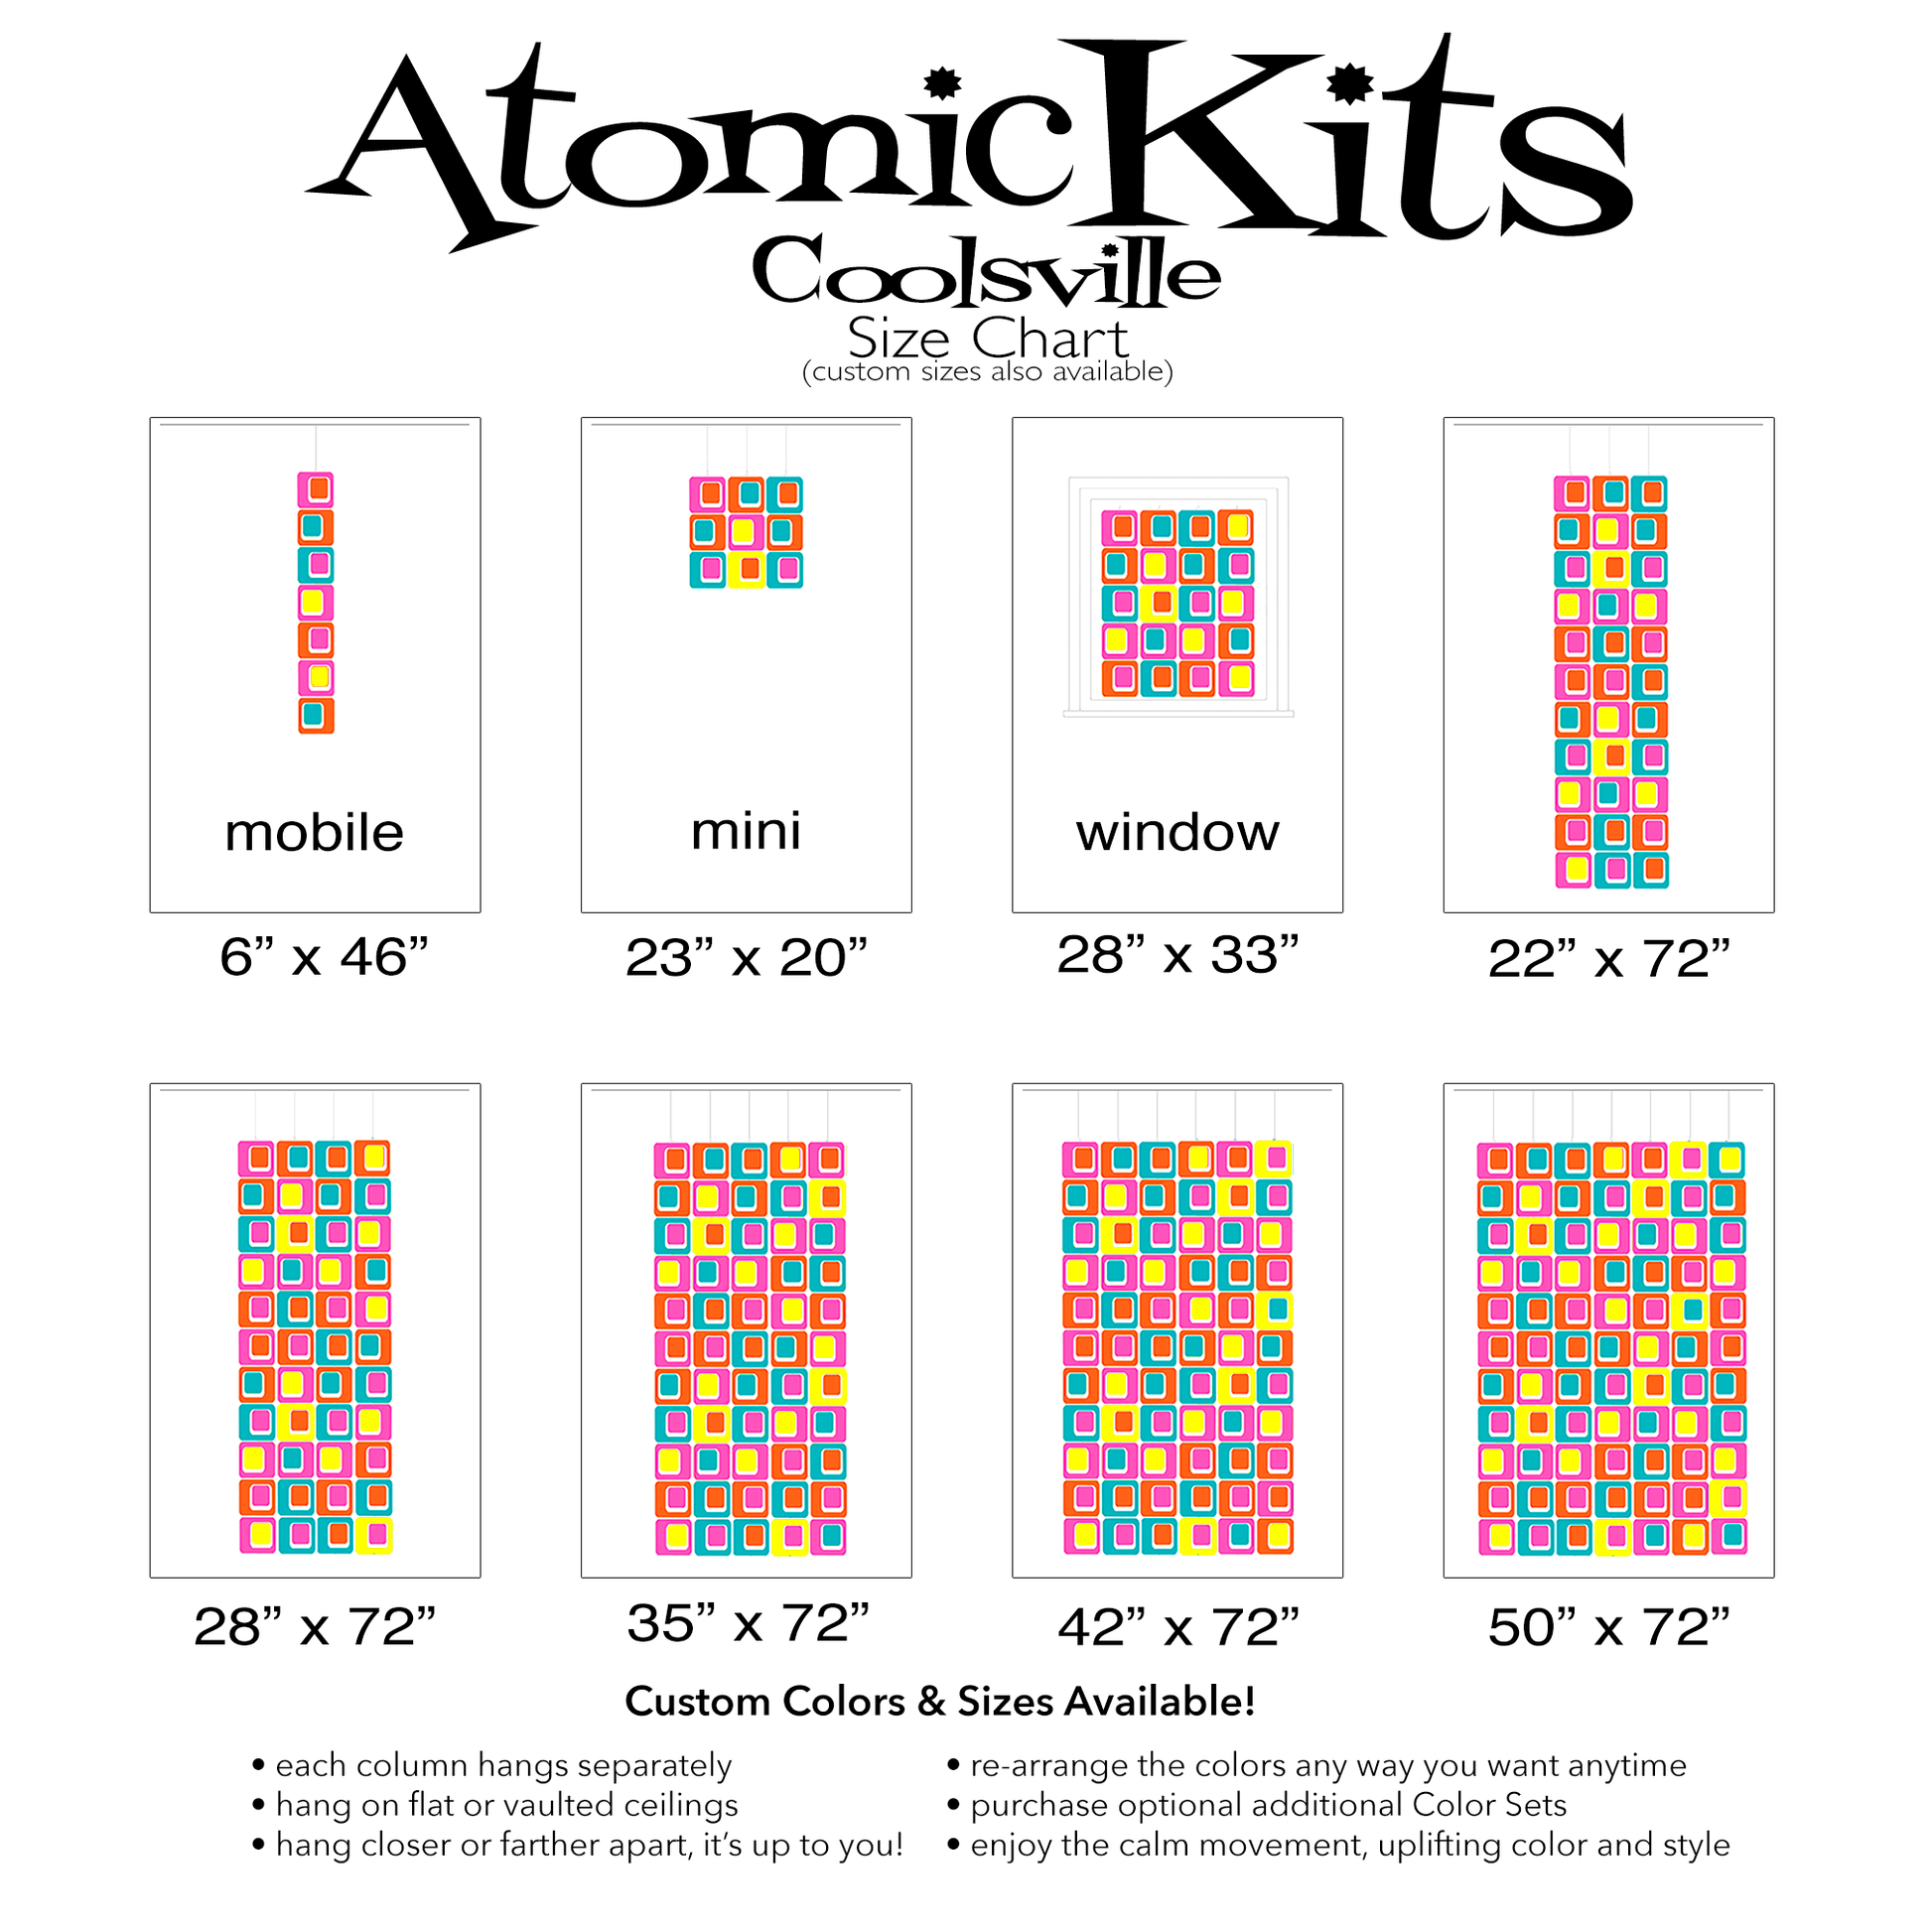 Size Chart for Coolsville in Hot Pink, Yellow, Orange, and Aqua Blue Colors for Room Dividers, Curtains, Mobiles, and Wall Art DIY KIT by AtomicMobiles.com